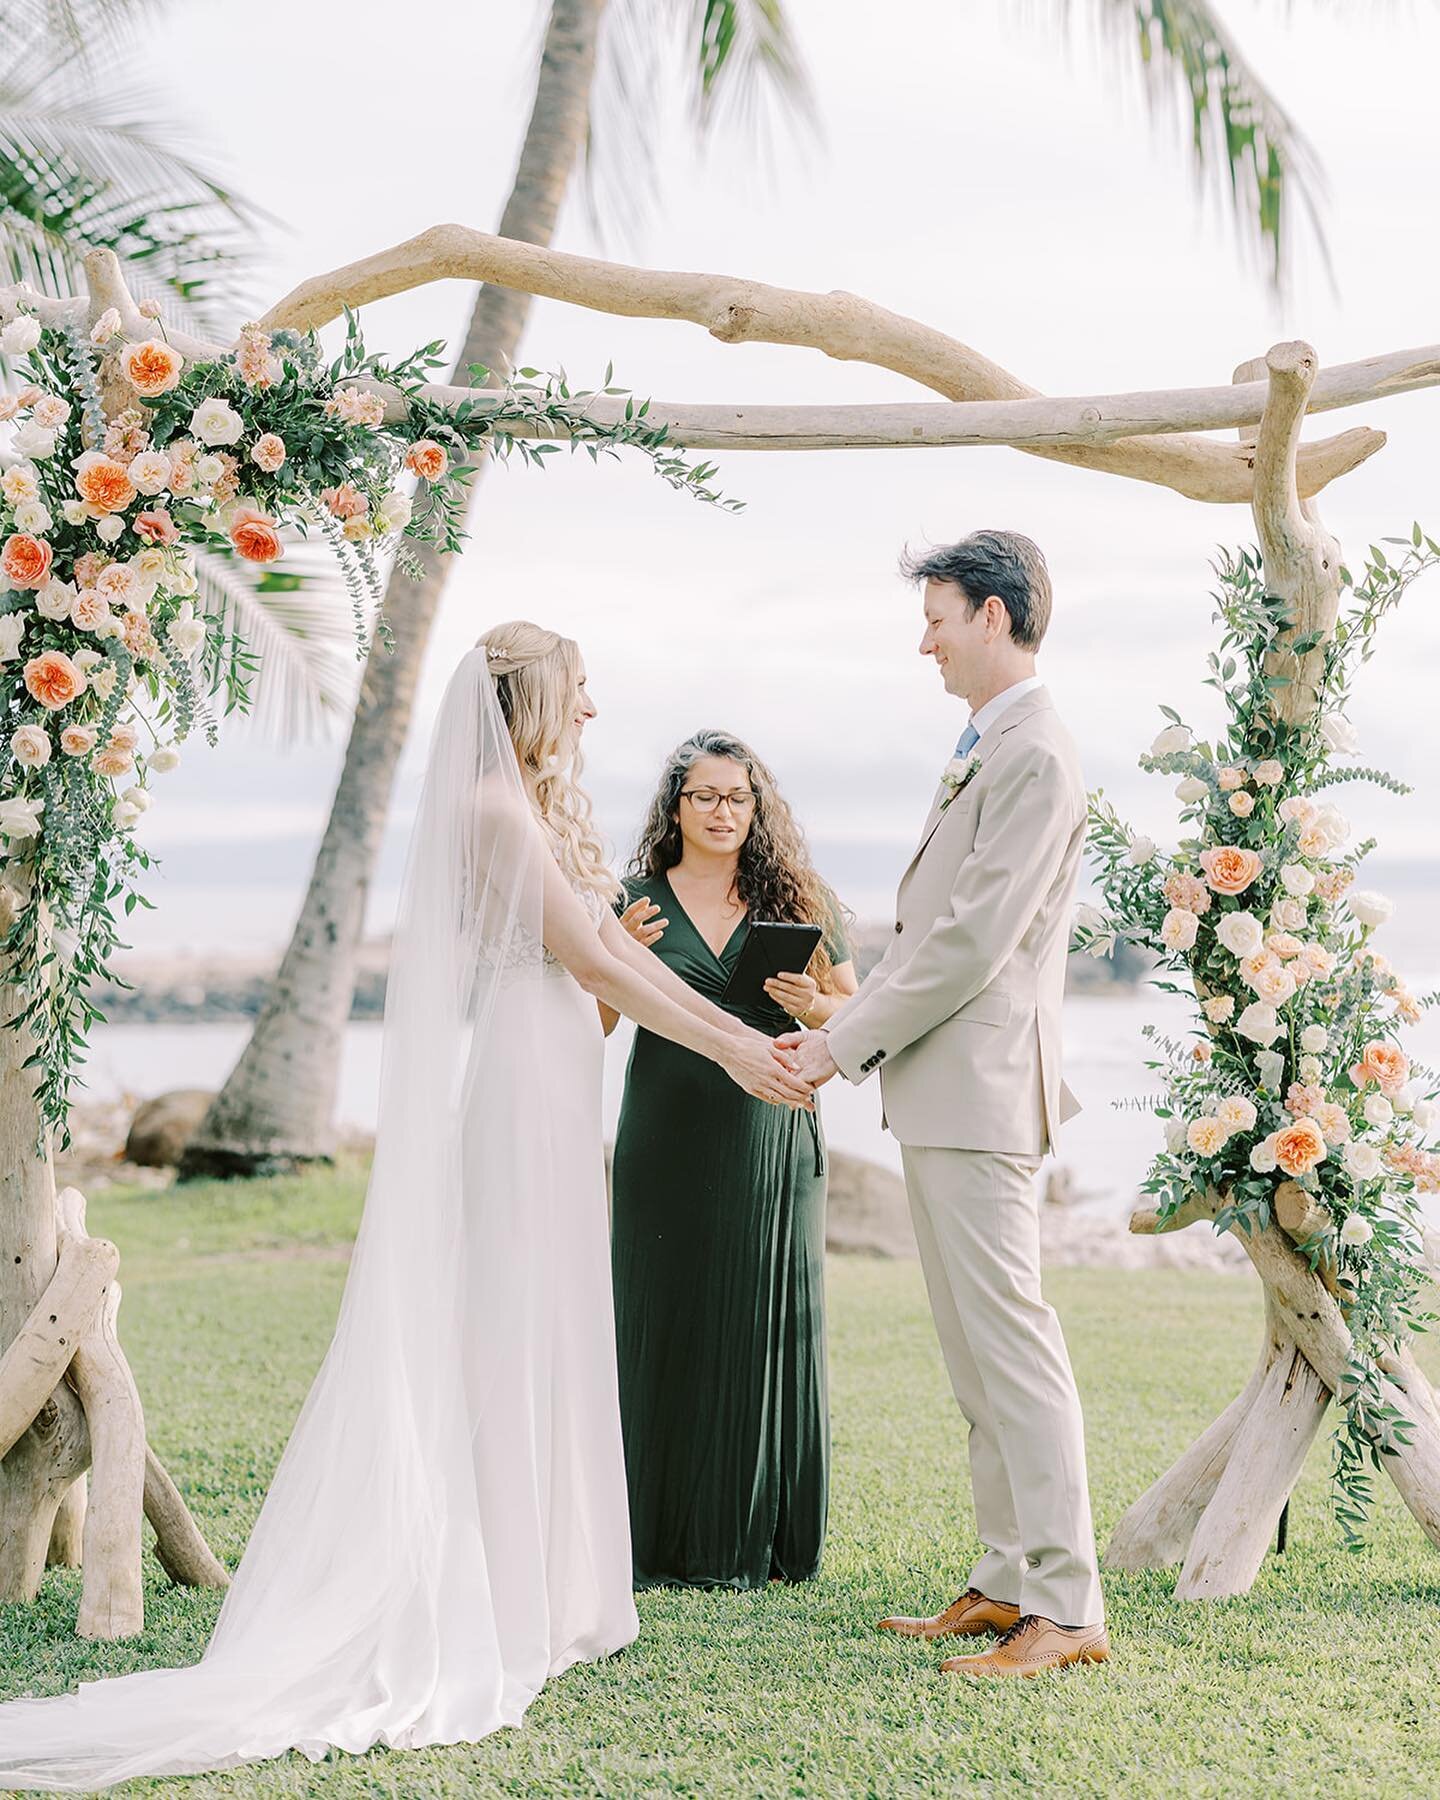 A soft romantic outdoor ceremony at the Olowalu Plantation House with the sweetest couple 🤍

Planning &amp; Coordination @whiteorchidwedding 
Photography @jana_dillon 
Florals @teresasenamaui 
Beauty @mauimakeupartistry